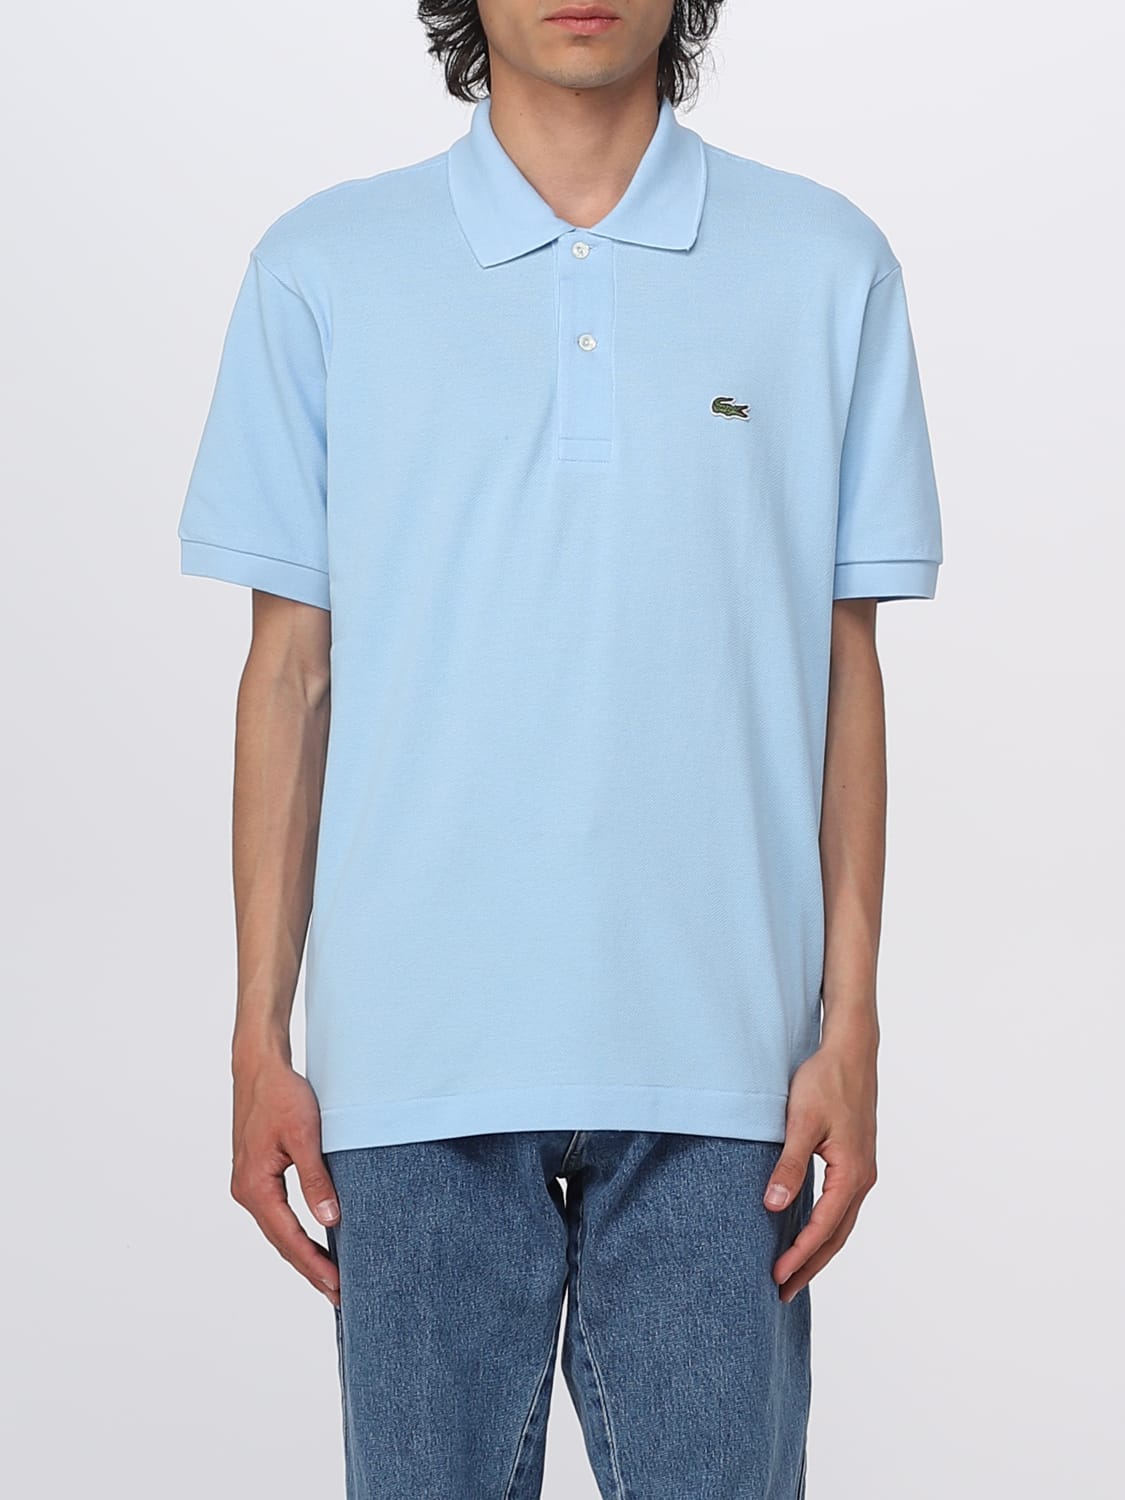 Lacoste Outlet: polo shirt for man Ocean | polo shirt L1212 at GIGLIO.COM